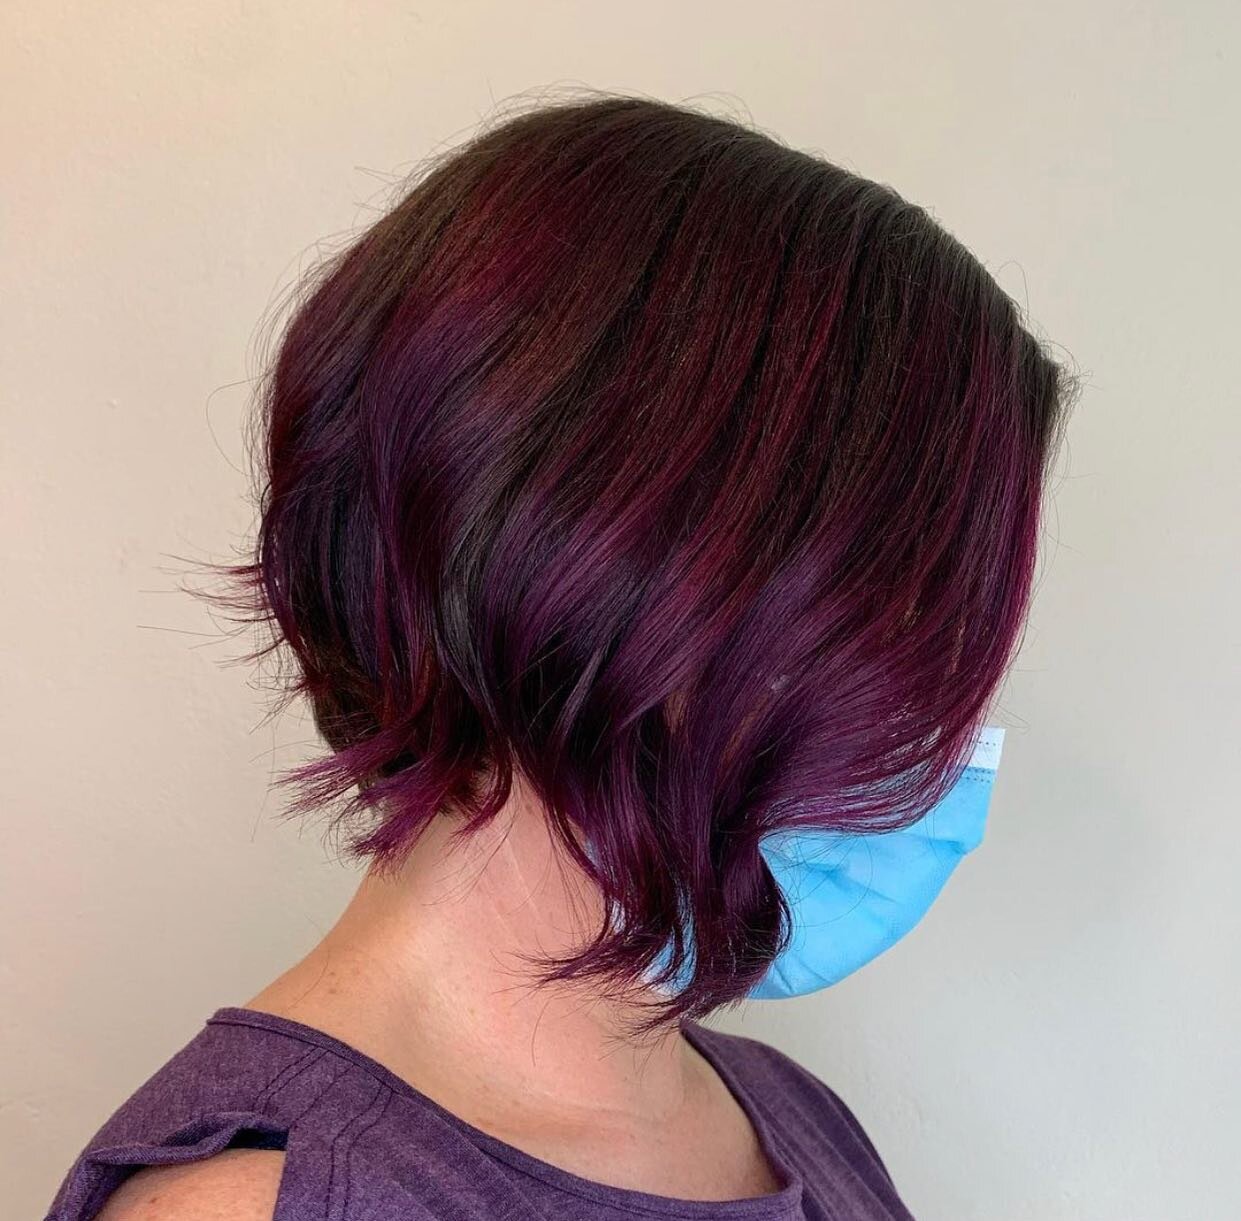 💜Pretty in plum color and cut by @style_by_nicolettec  we love these warm tones to liven up spring! 👏🏻